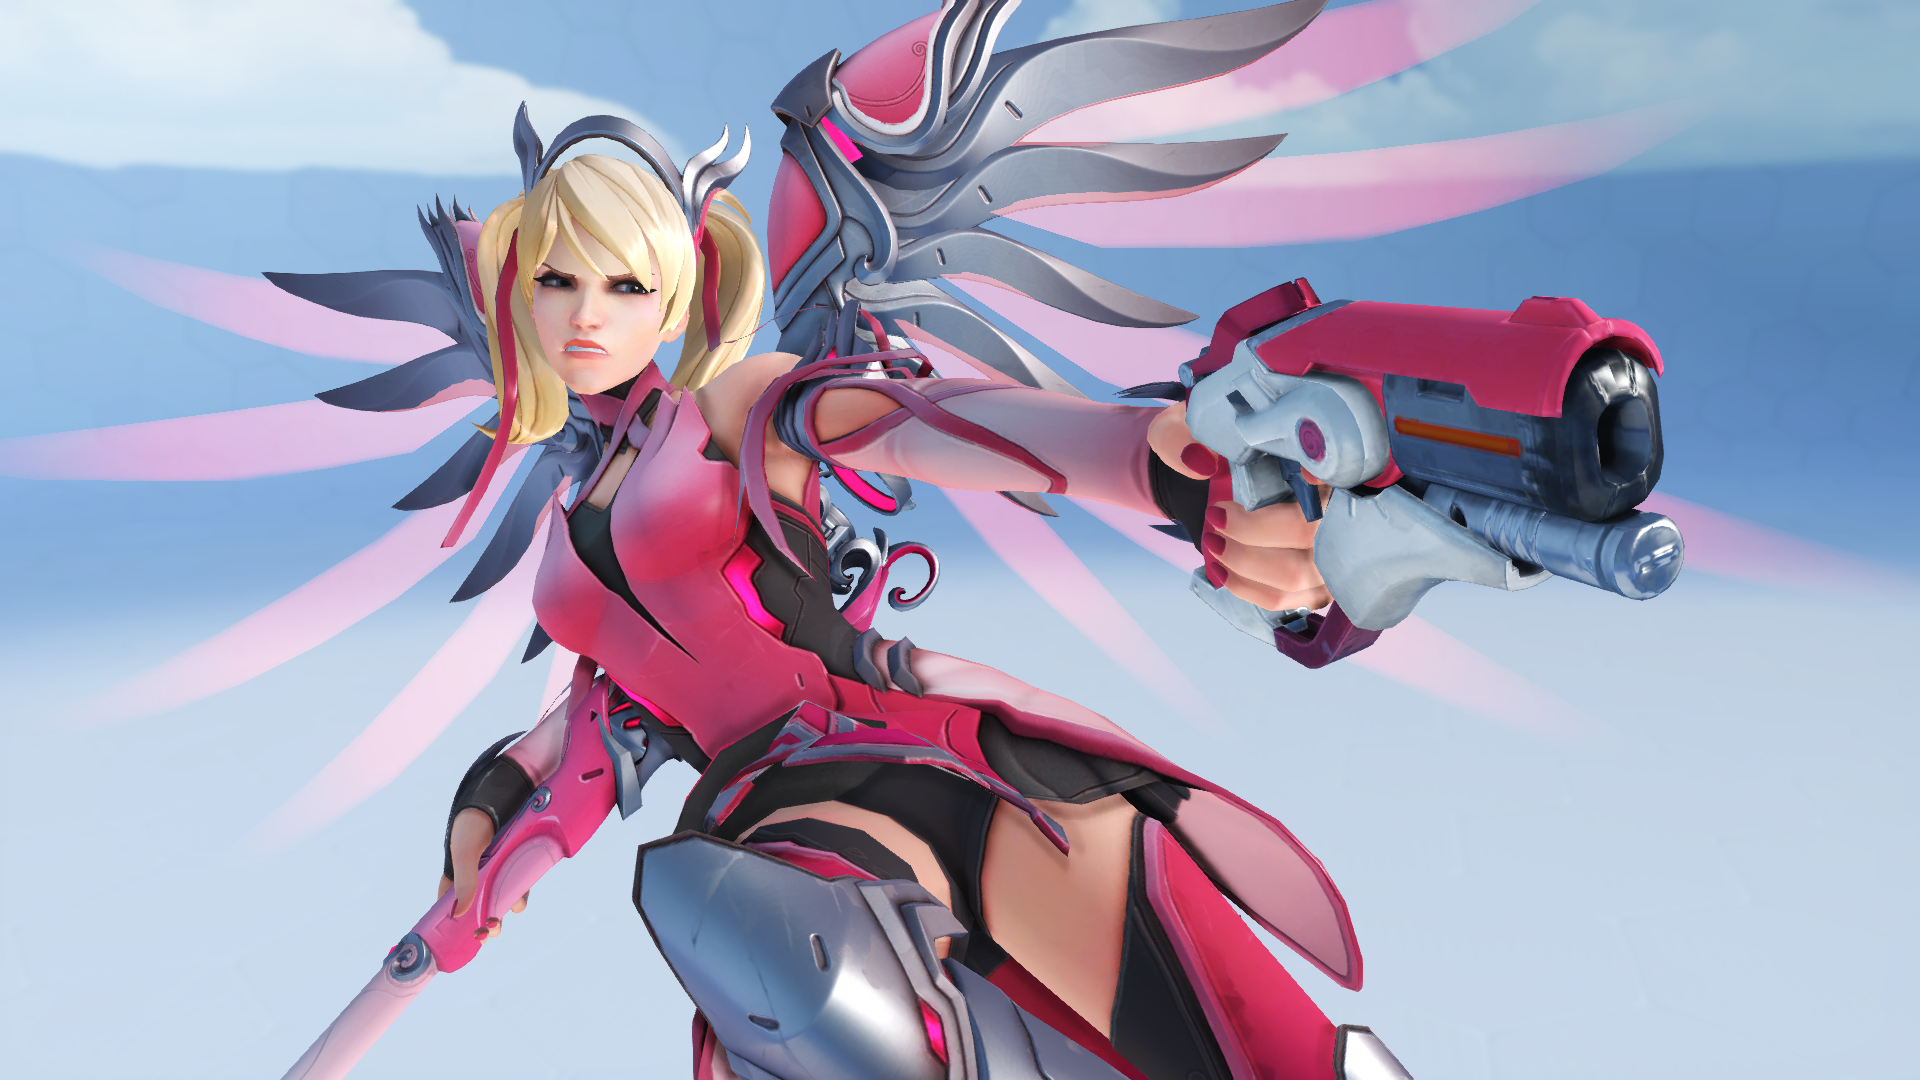 Blizzard has raised almost 10 million from its Pink Mercy charity